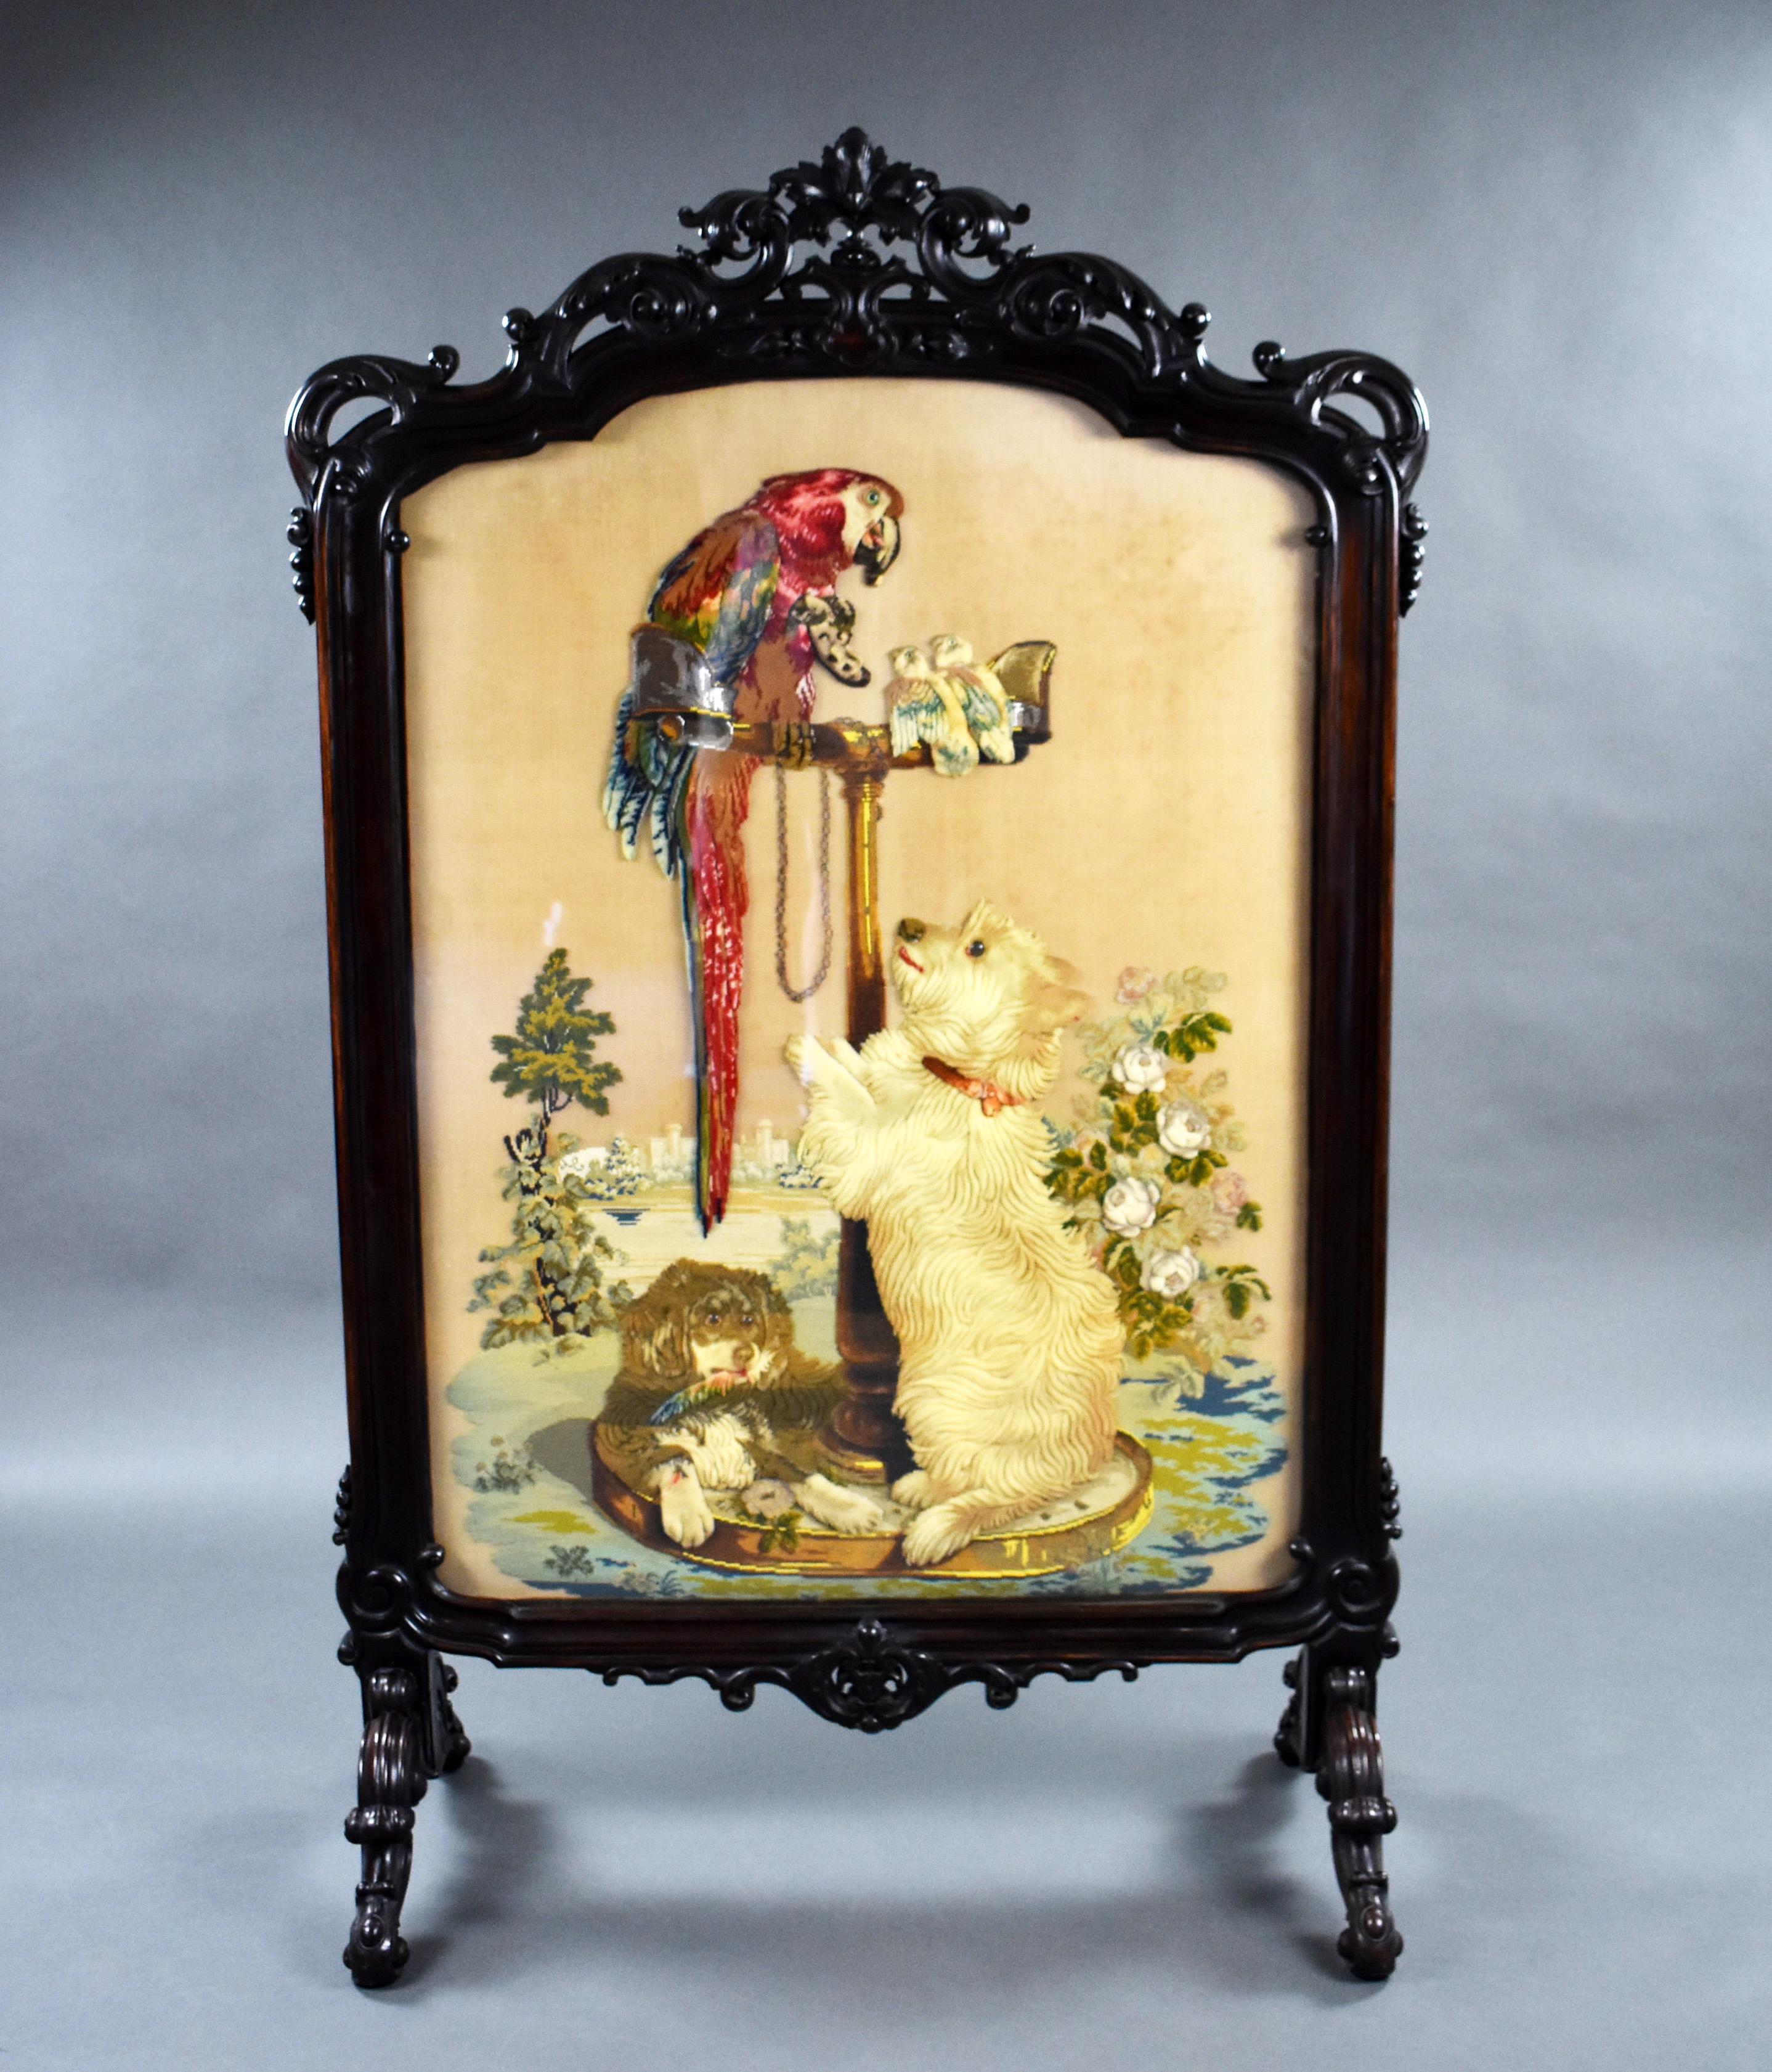 For sale is a fine and rare large Victorian rosewood screen, having an ornately carved top, above embroidery, depicting a dog jumping up at a parrot on a perch, with two other small birds on the perch beside it another dog lies on the base of the